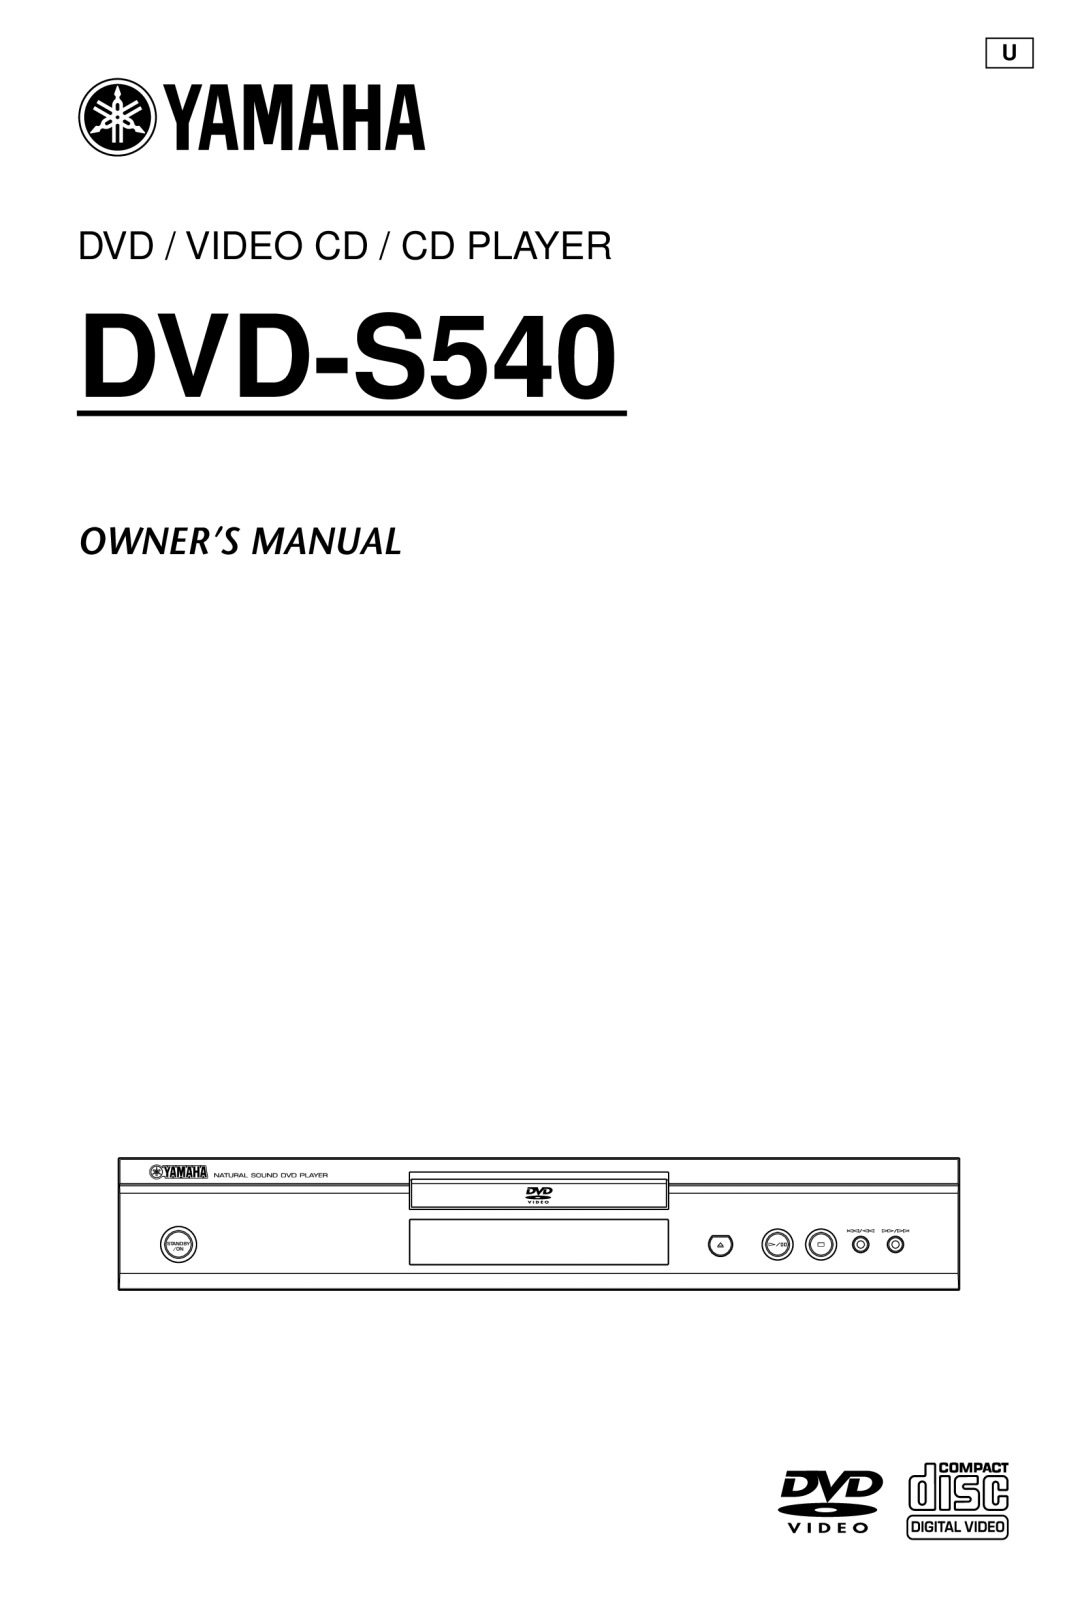 Yamaha HTR-5630RDS owner manual Dvd / Video Cd / Cd Player, DVD-S540, Owner’S Manual 